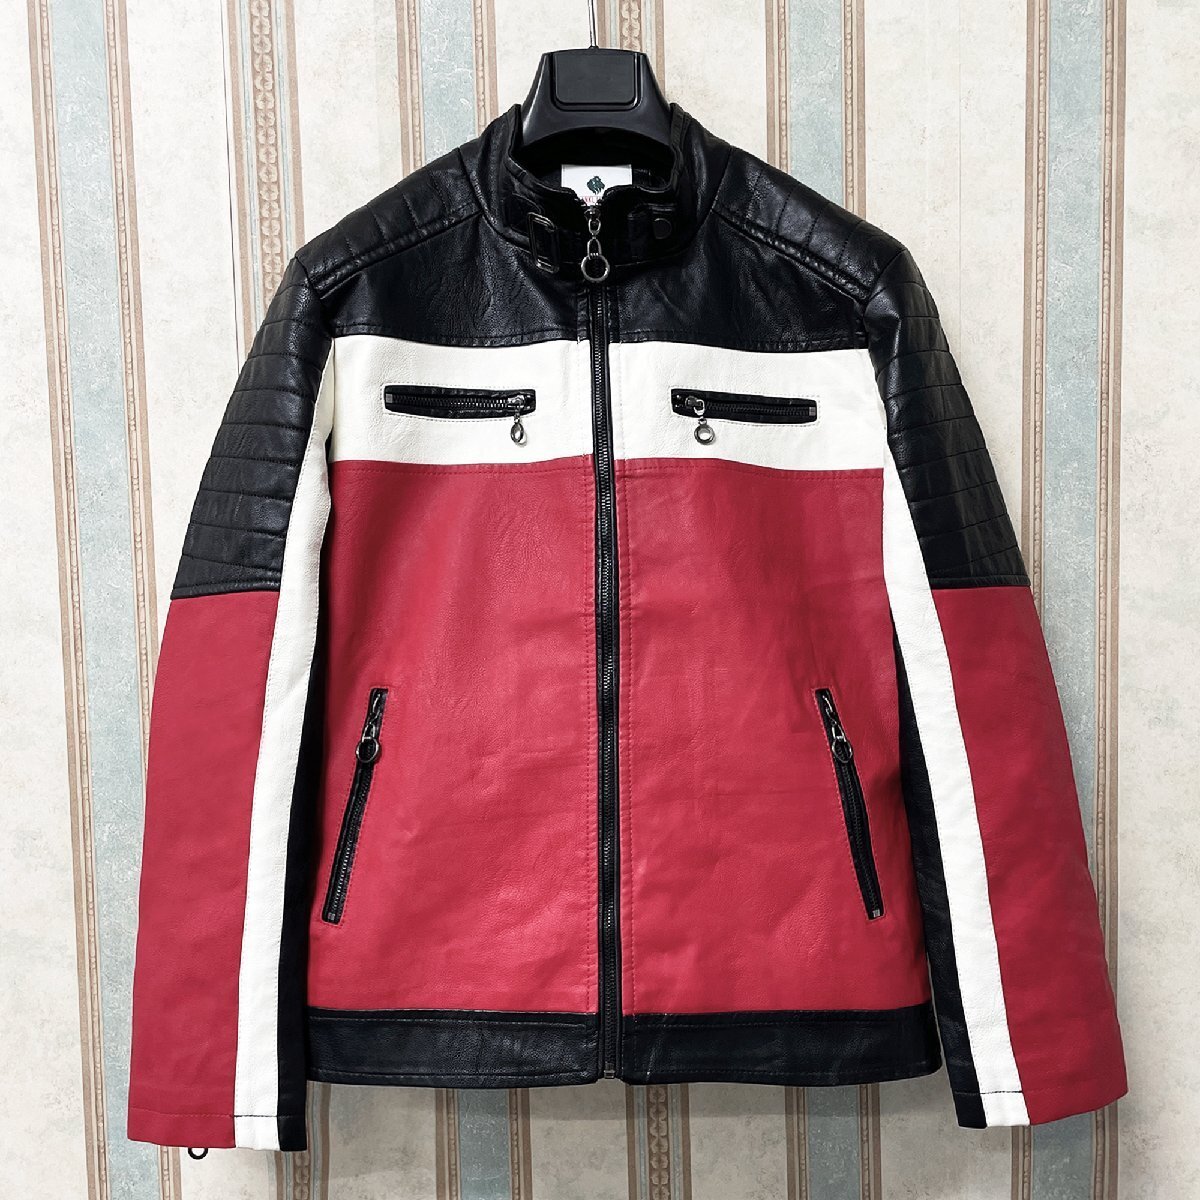  piece . regular price 12 ten thousand FRANKLIN MUSK* America * New York departure leather jacket cow leather Single Rider's leather jacket bike going out put on size 2